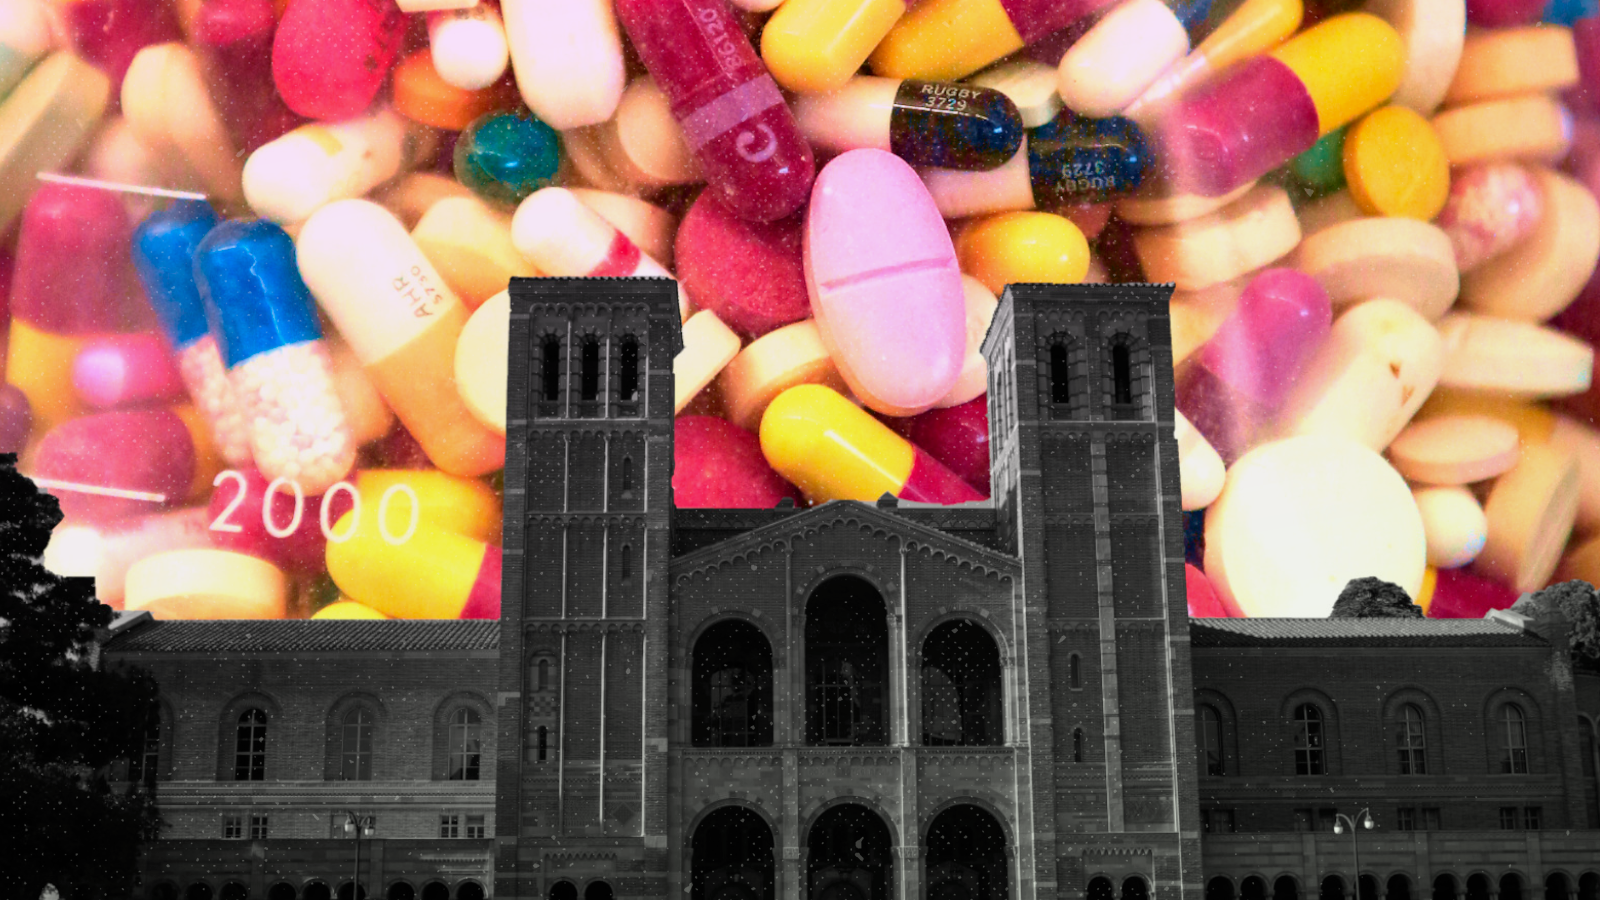 A photo of the UCLA campus is overlaid on a pile of pills.